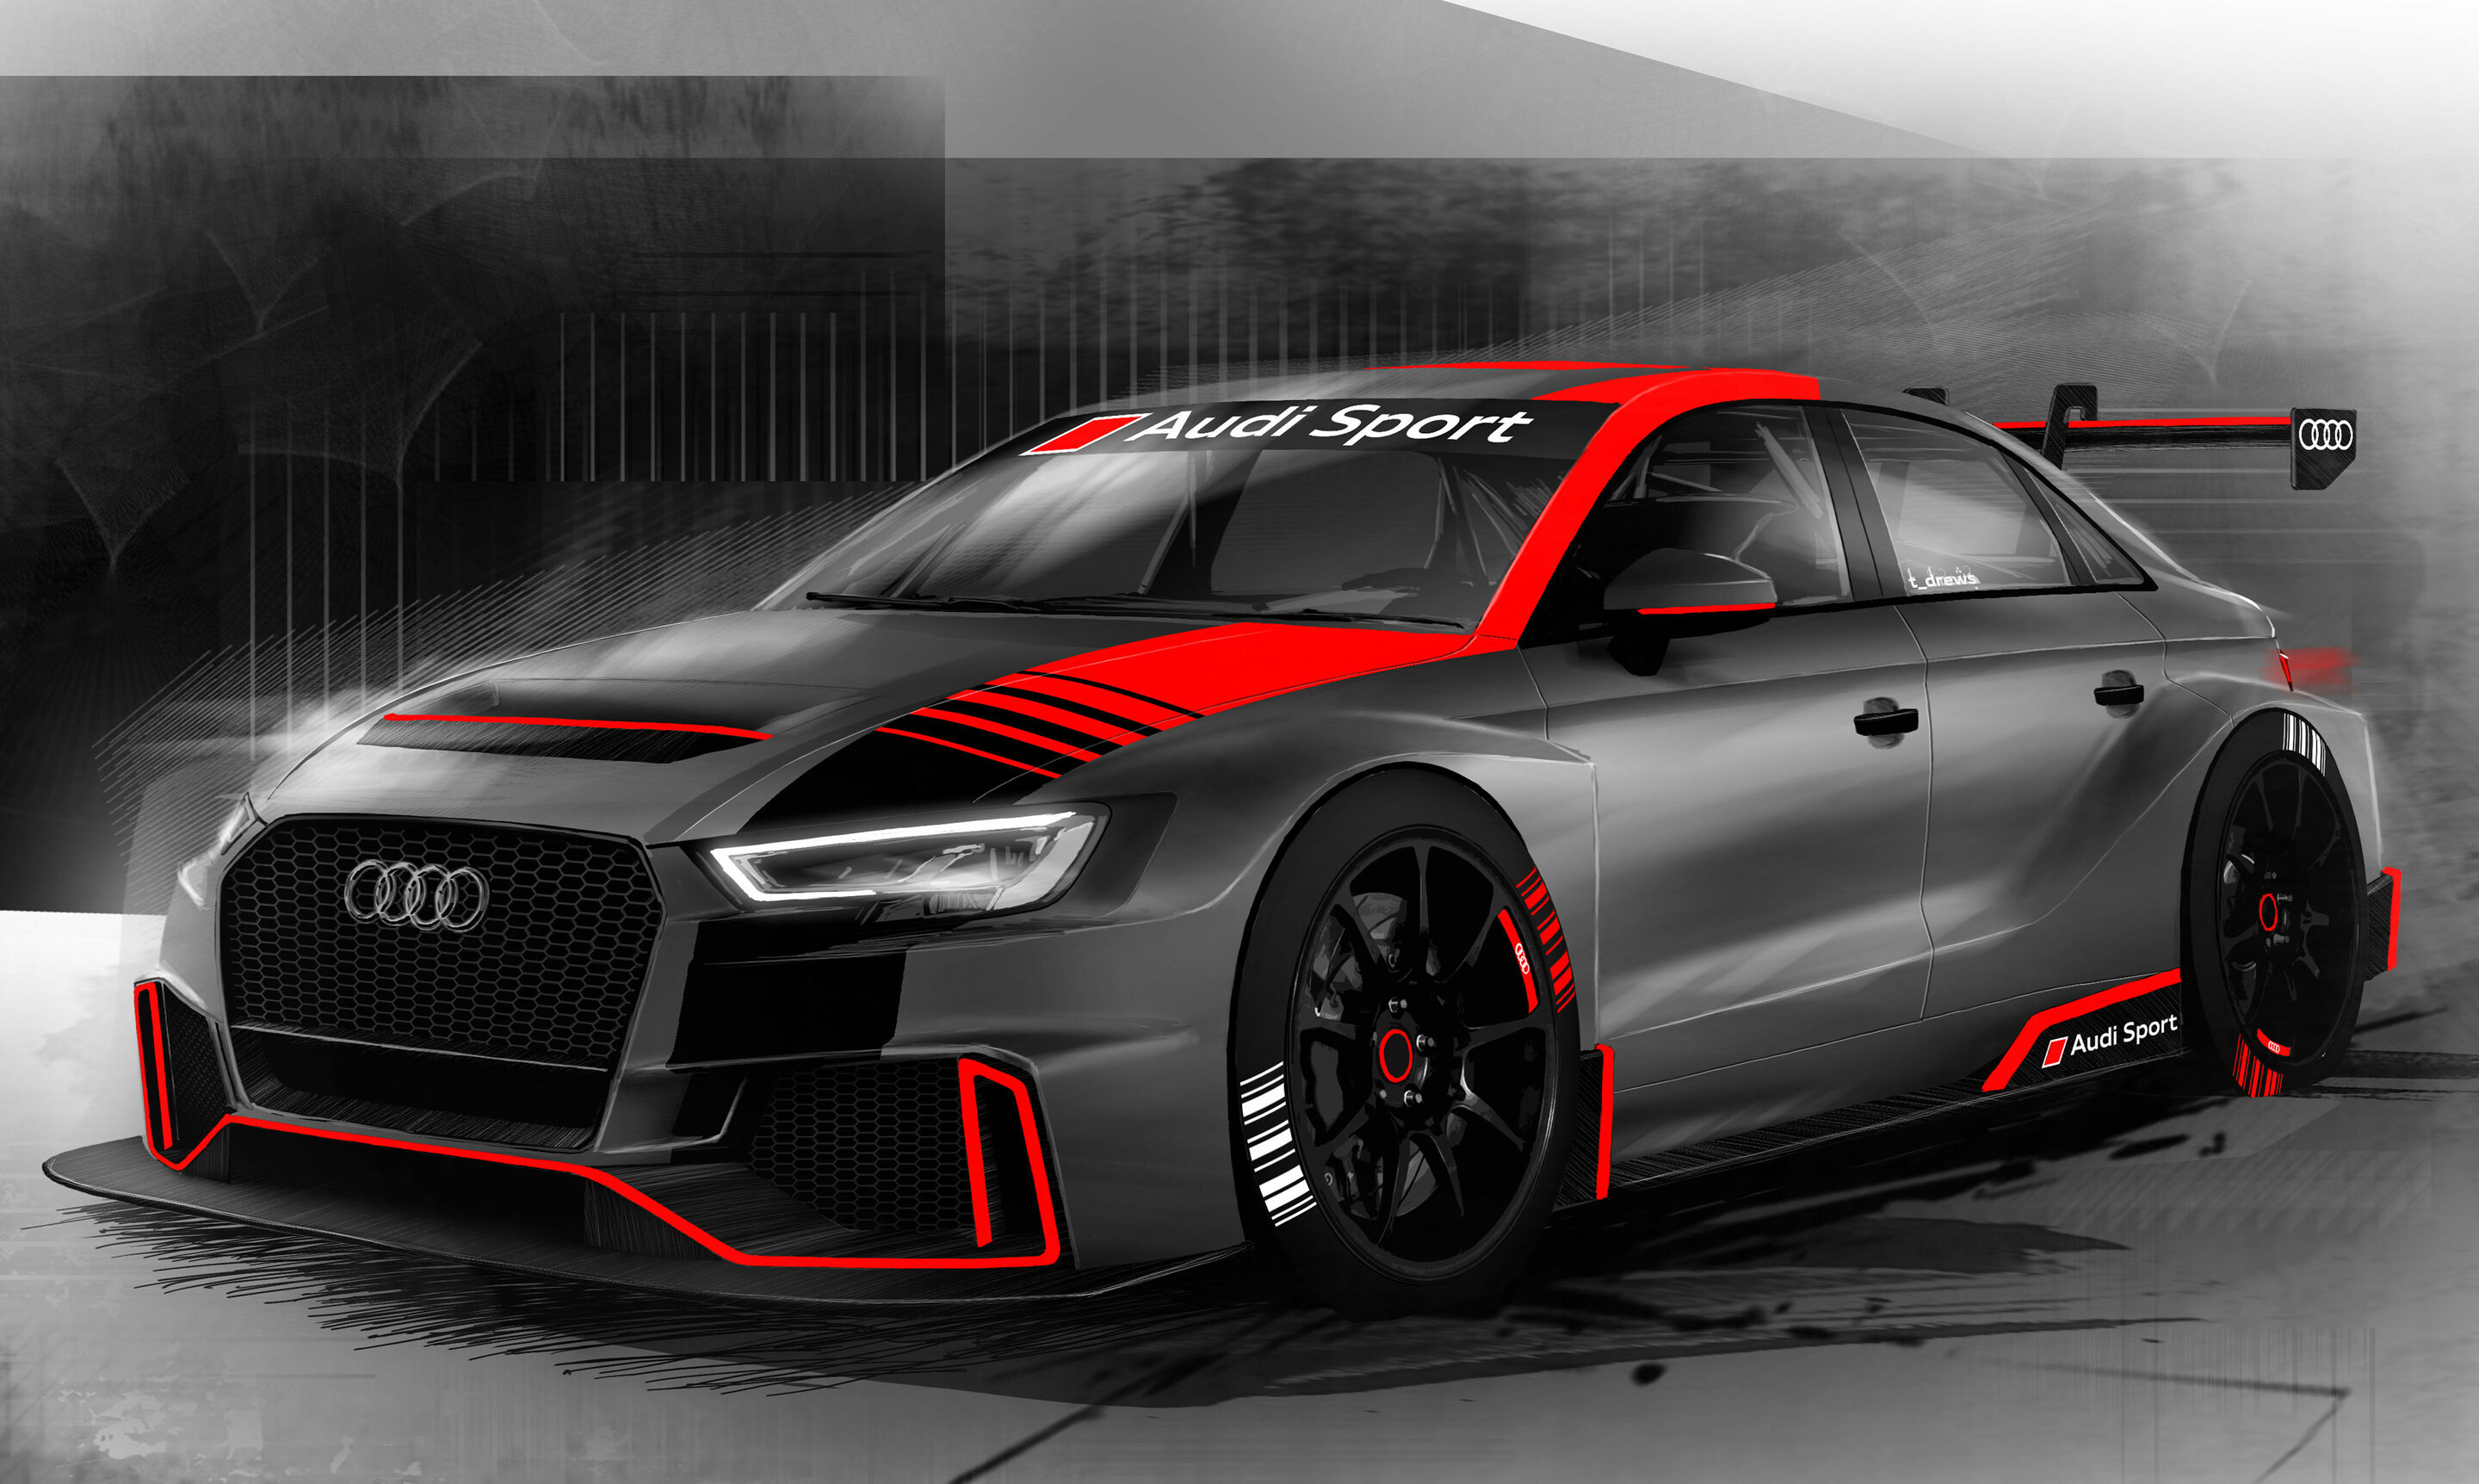 Audi Sport customer racing with two partner teams in new WTCR